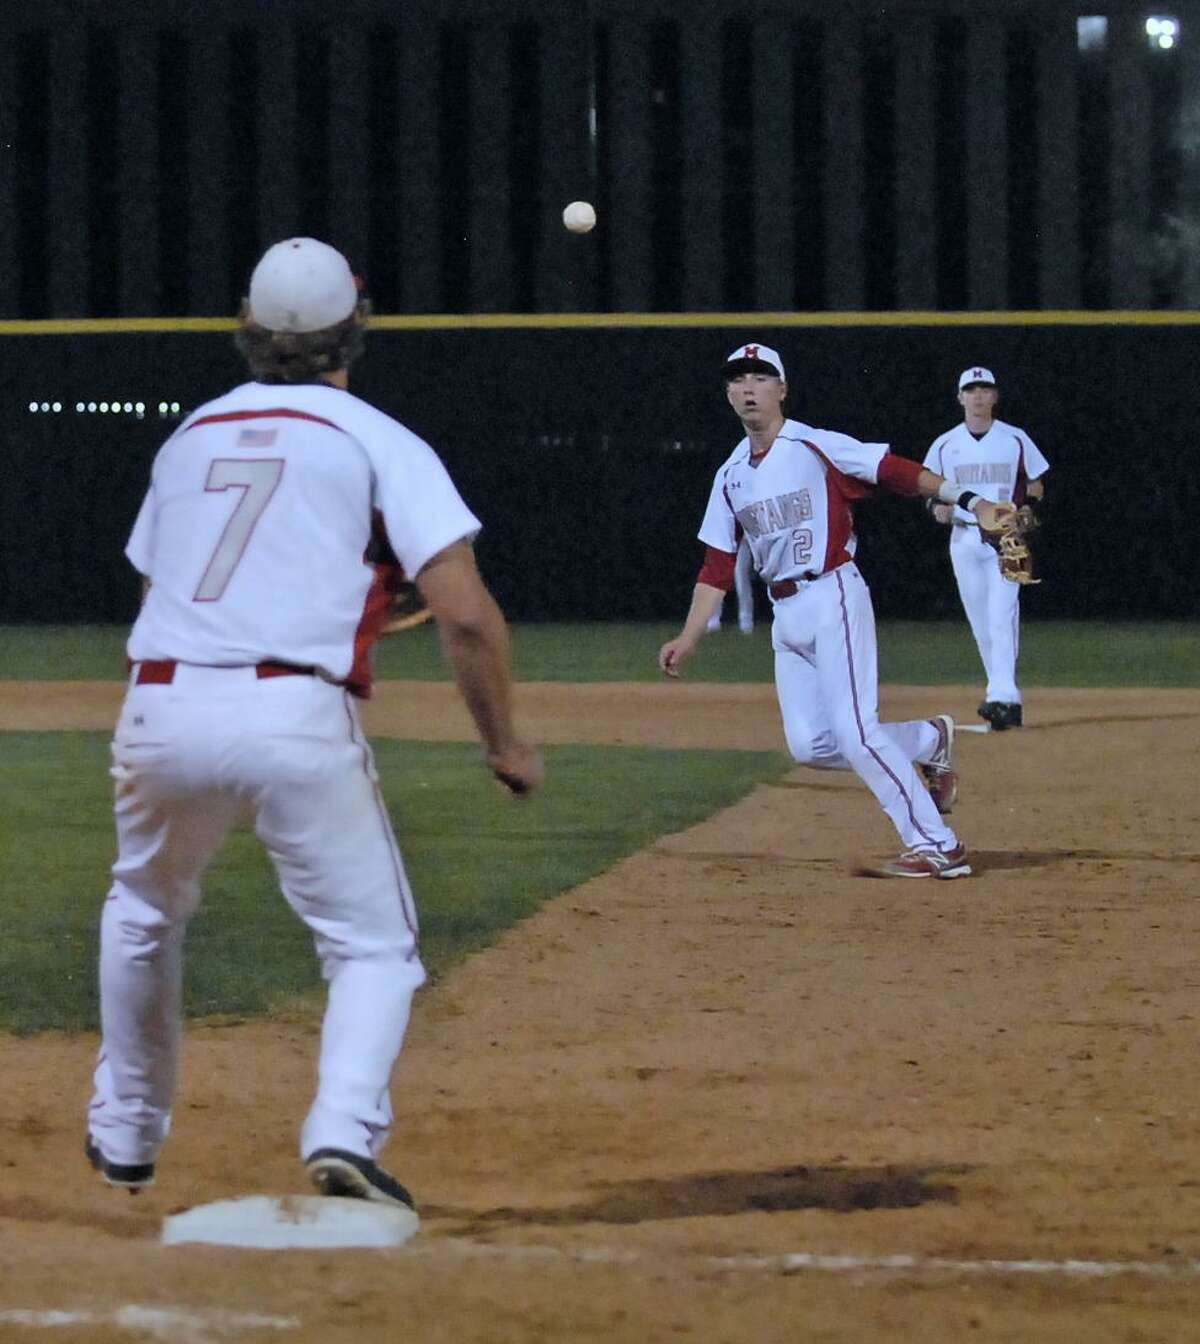 Memorial's Tyler McCloskey (#7) covers first base as Kody Clemens (#2) fields a Stratford hit and throws to first for the force out during their game at Memorial High School Tuesday 2/26/13. Standing on second base is Reid Nagle (#5). Photo © by Tony Bullard.